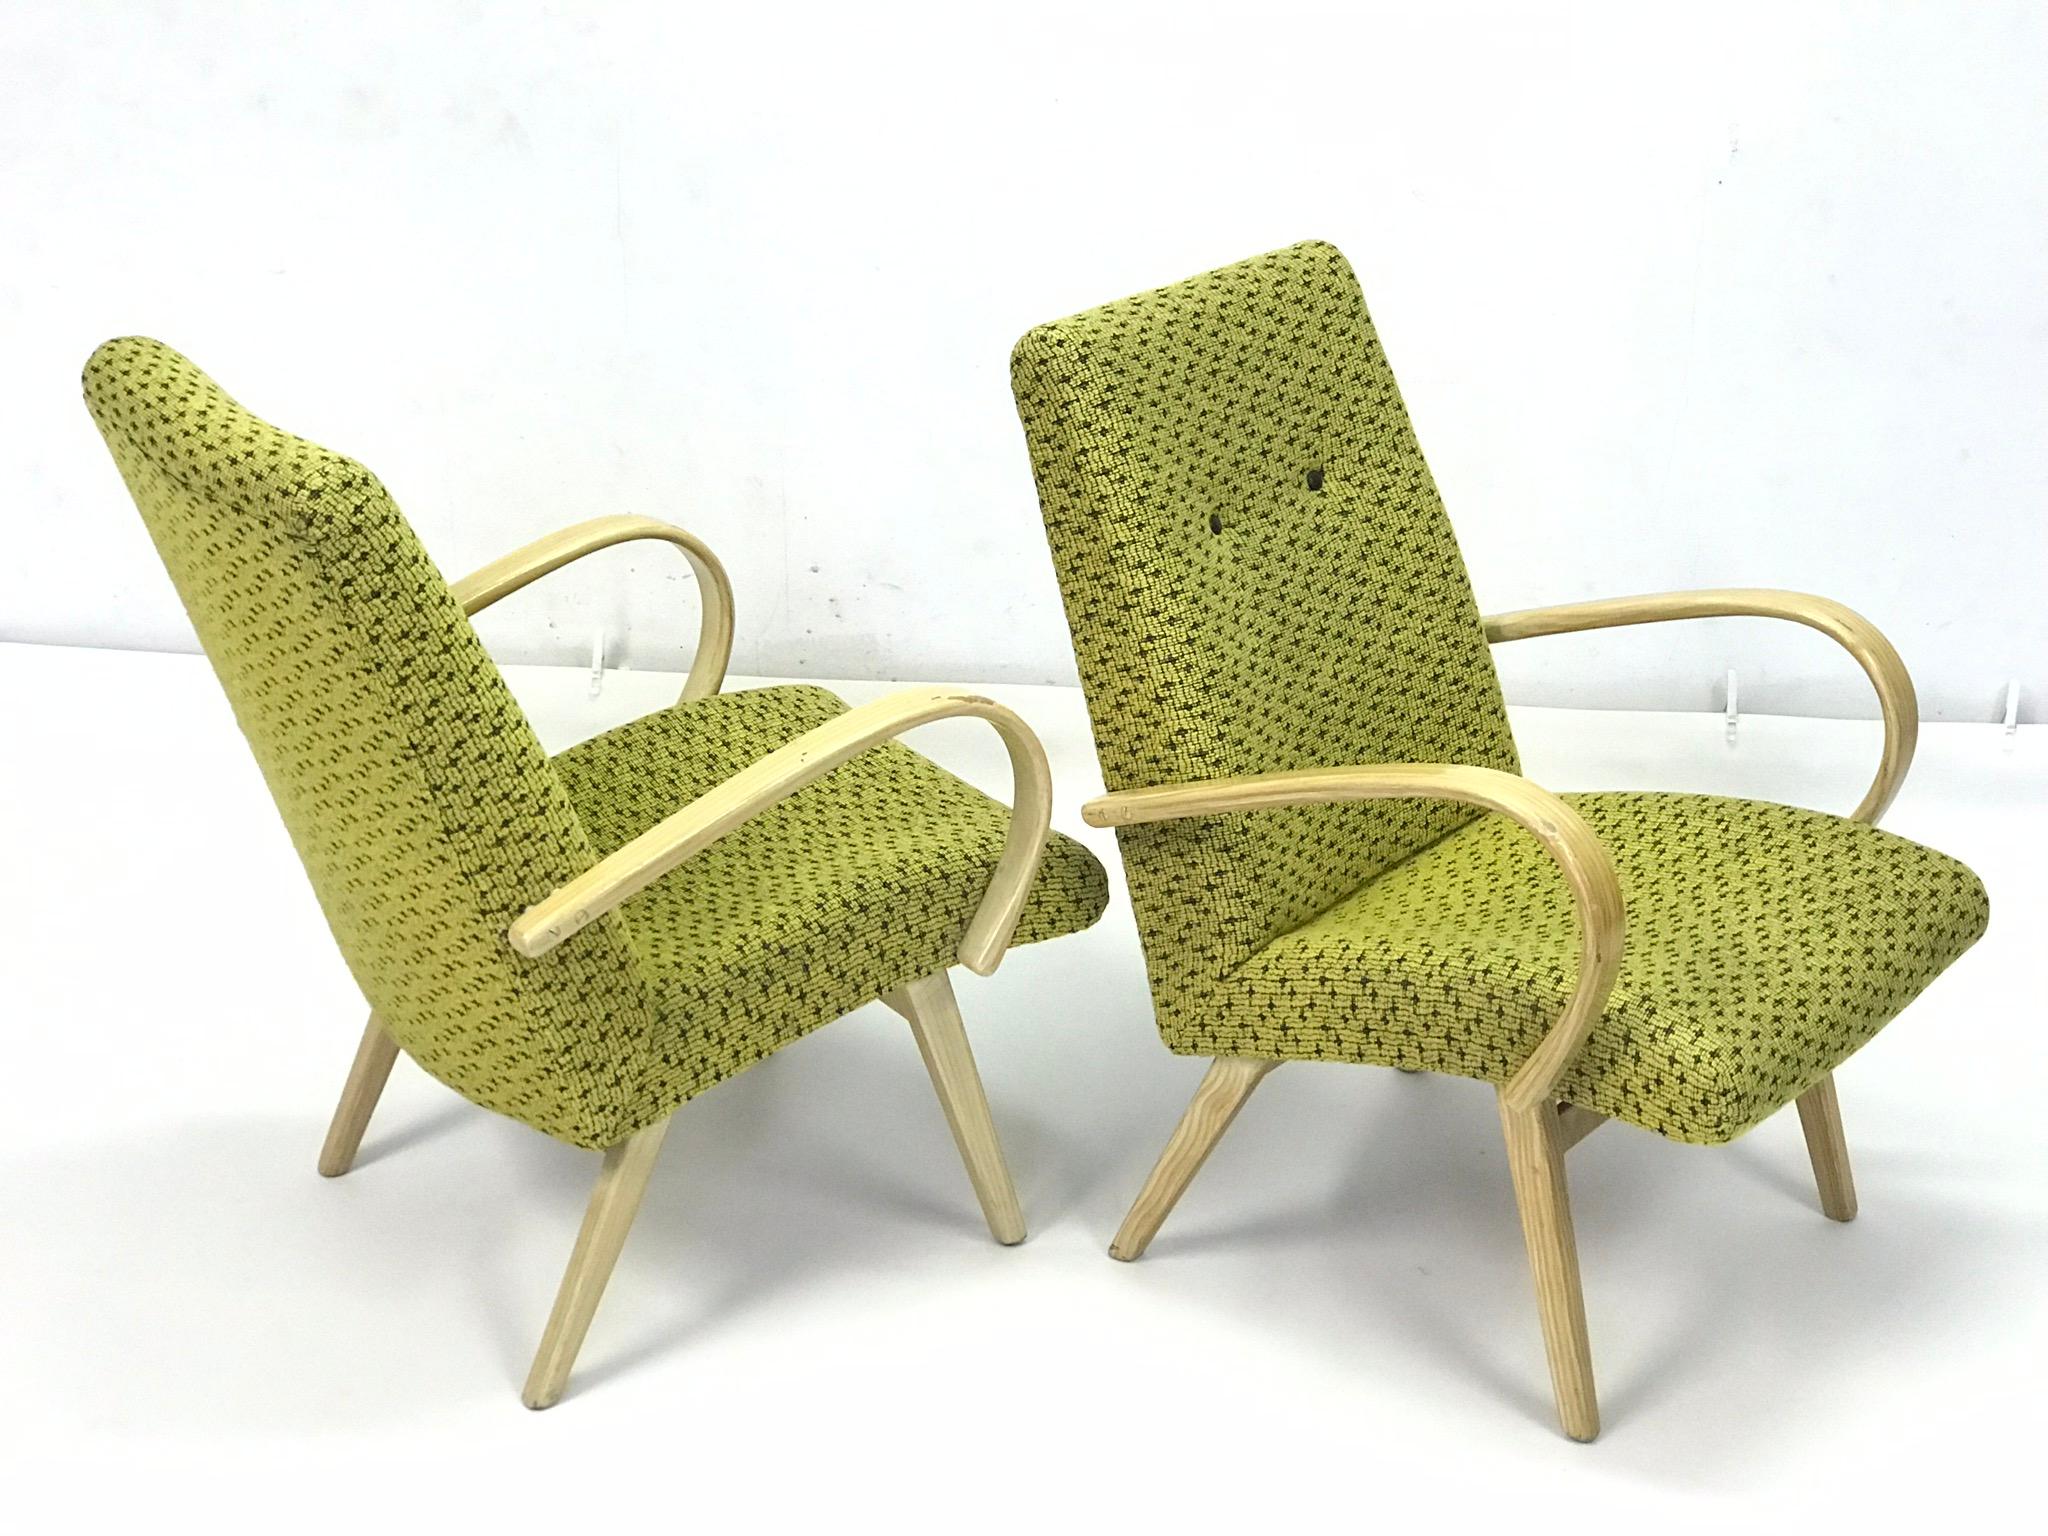 The armchairs designed by J. Halabala for connecting UP - factories. These ones have as original fabric as original wood. The armchairs have gentle scratches, the fabric is very nice. They are immediately usable.